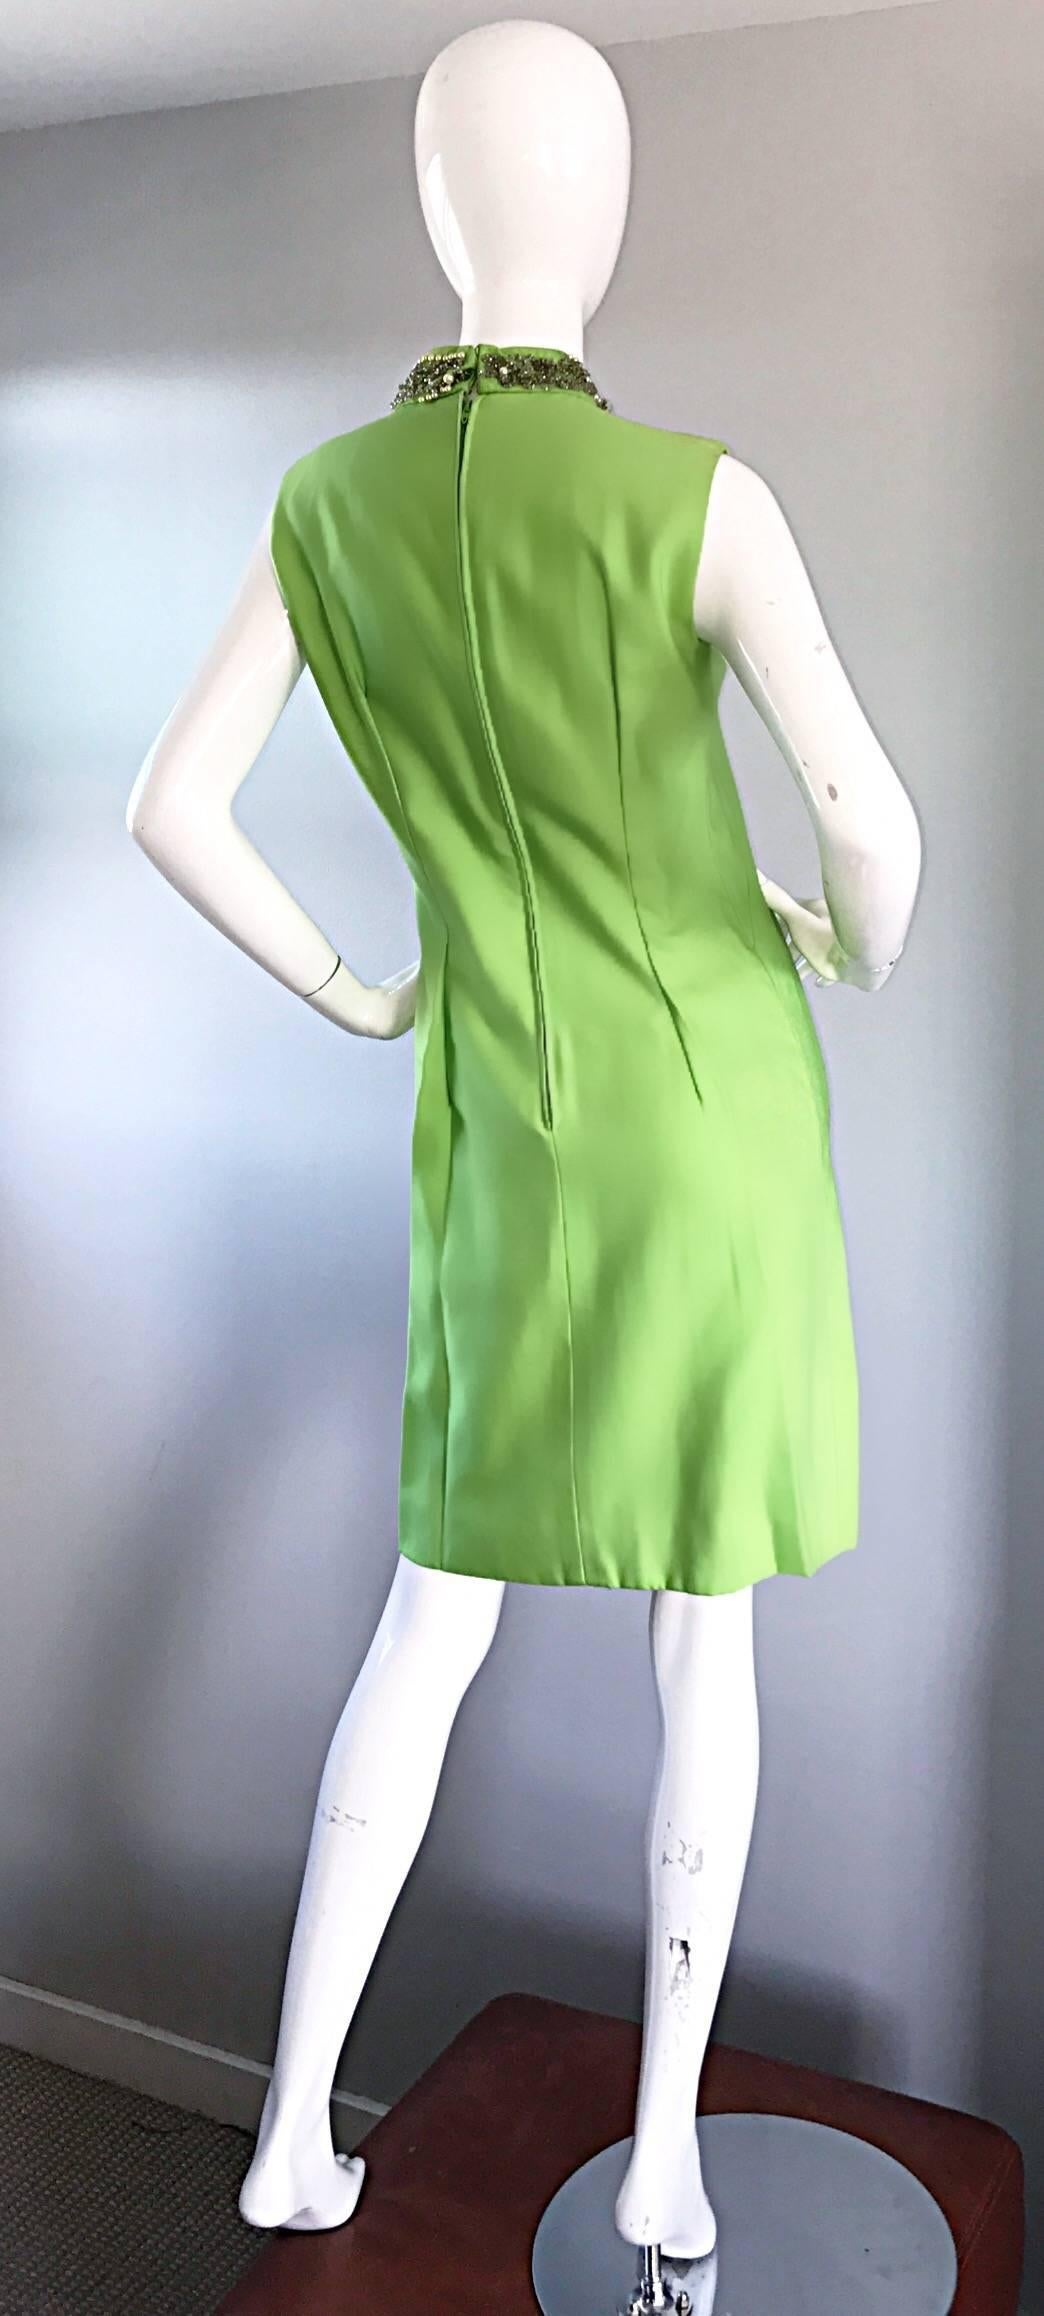 Women's 1960s Lime Green Vintage Beaded + Sequined 60s Bright Mod Shift Dress w/ Pearls For Sale